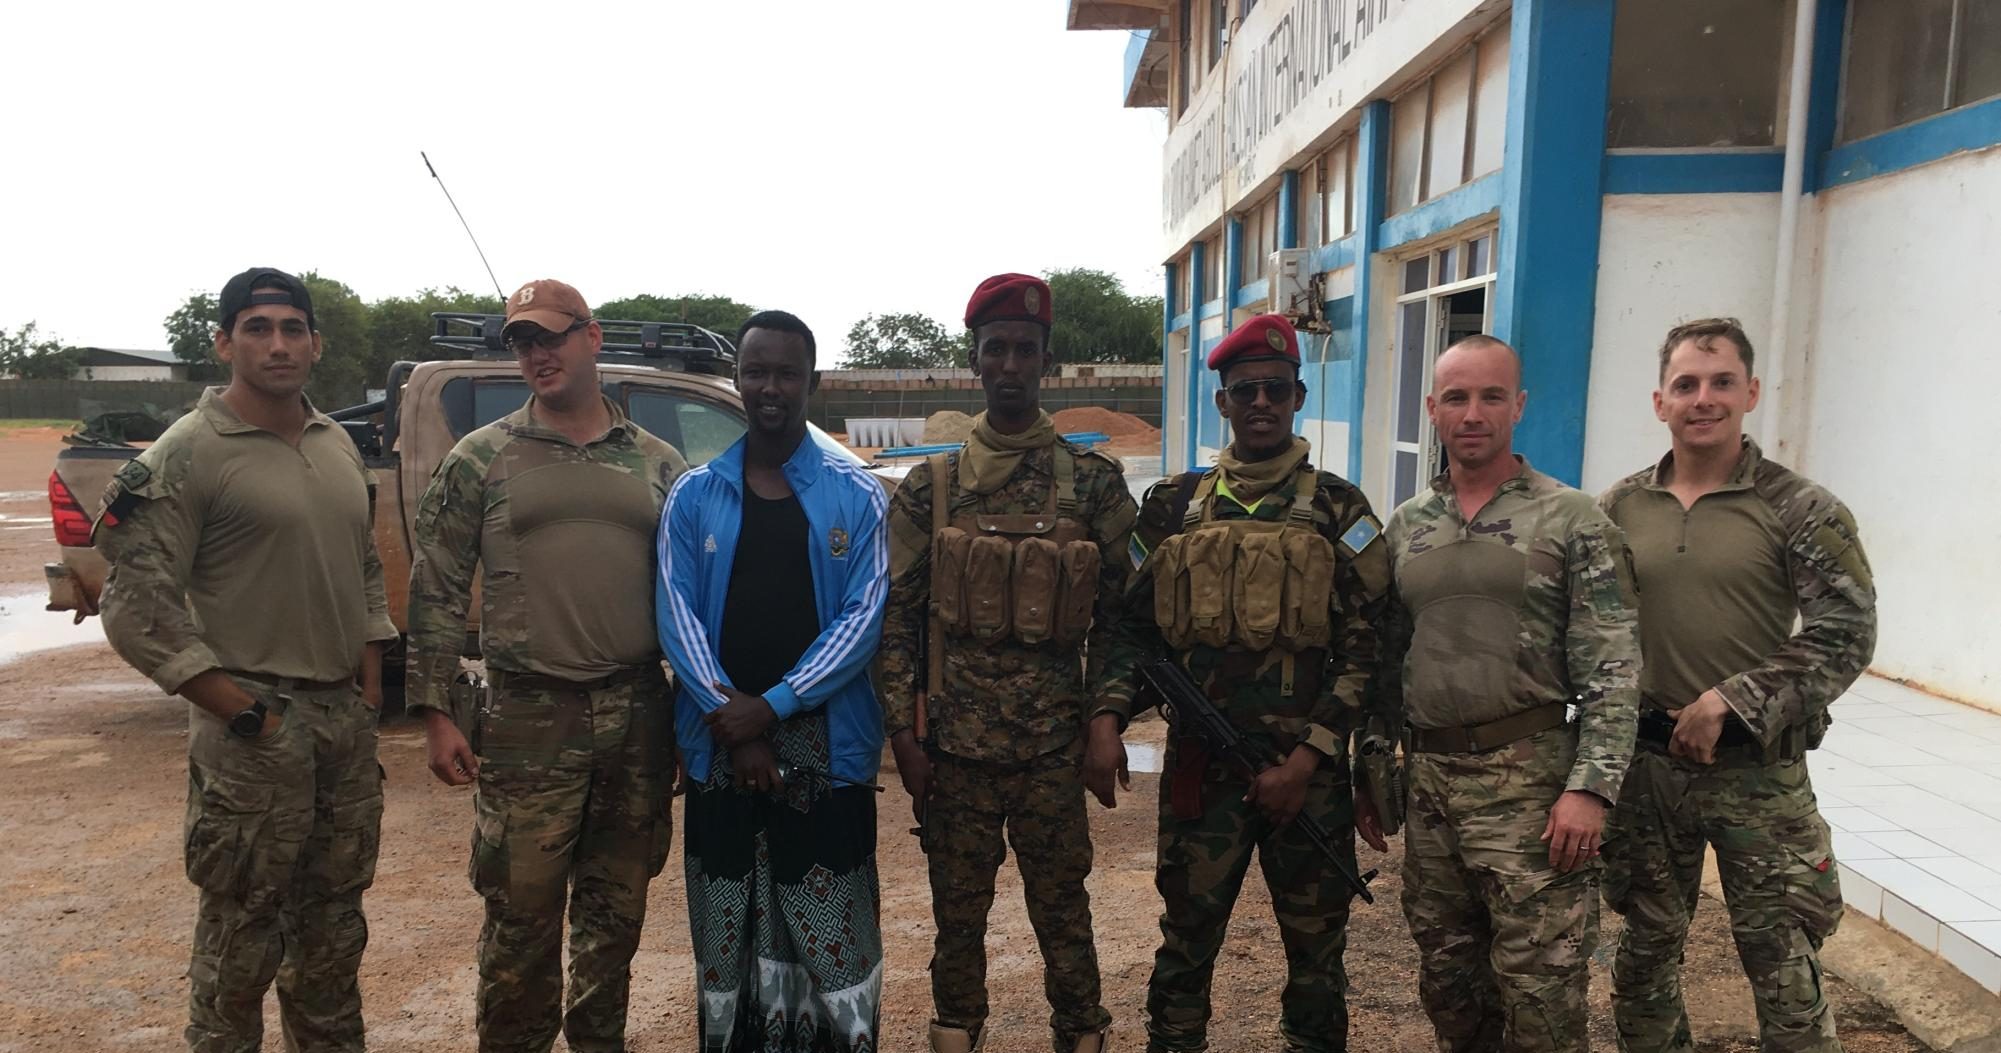 Mykal Kuslis, second from right, poses with members of his platoon and local soldiers during his National Guard deployment in Africa. (Courtesy of Mykal Kuslis)